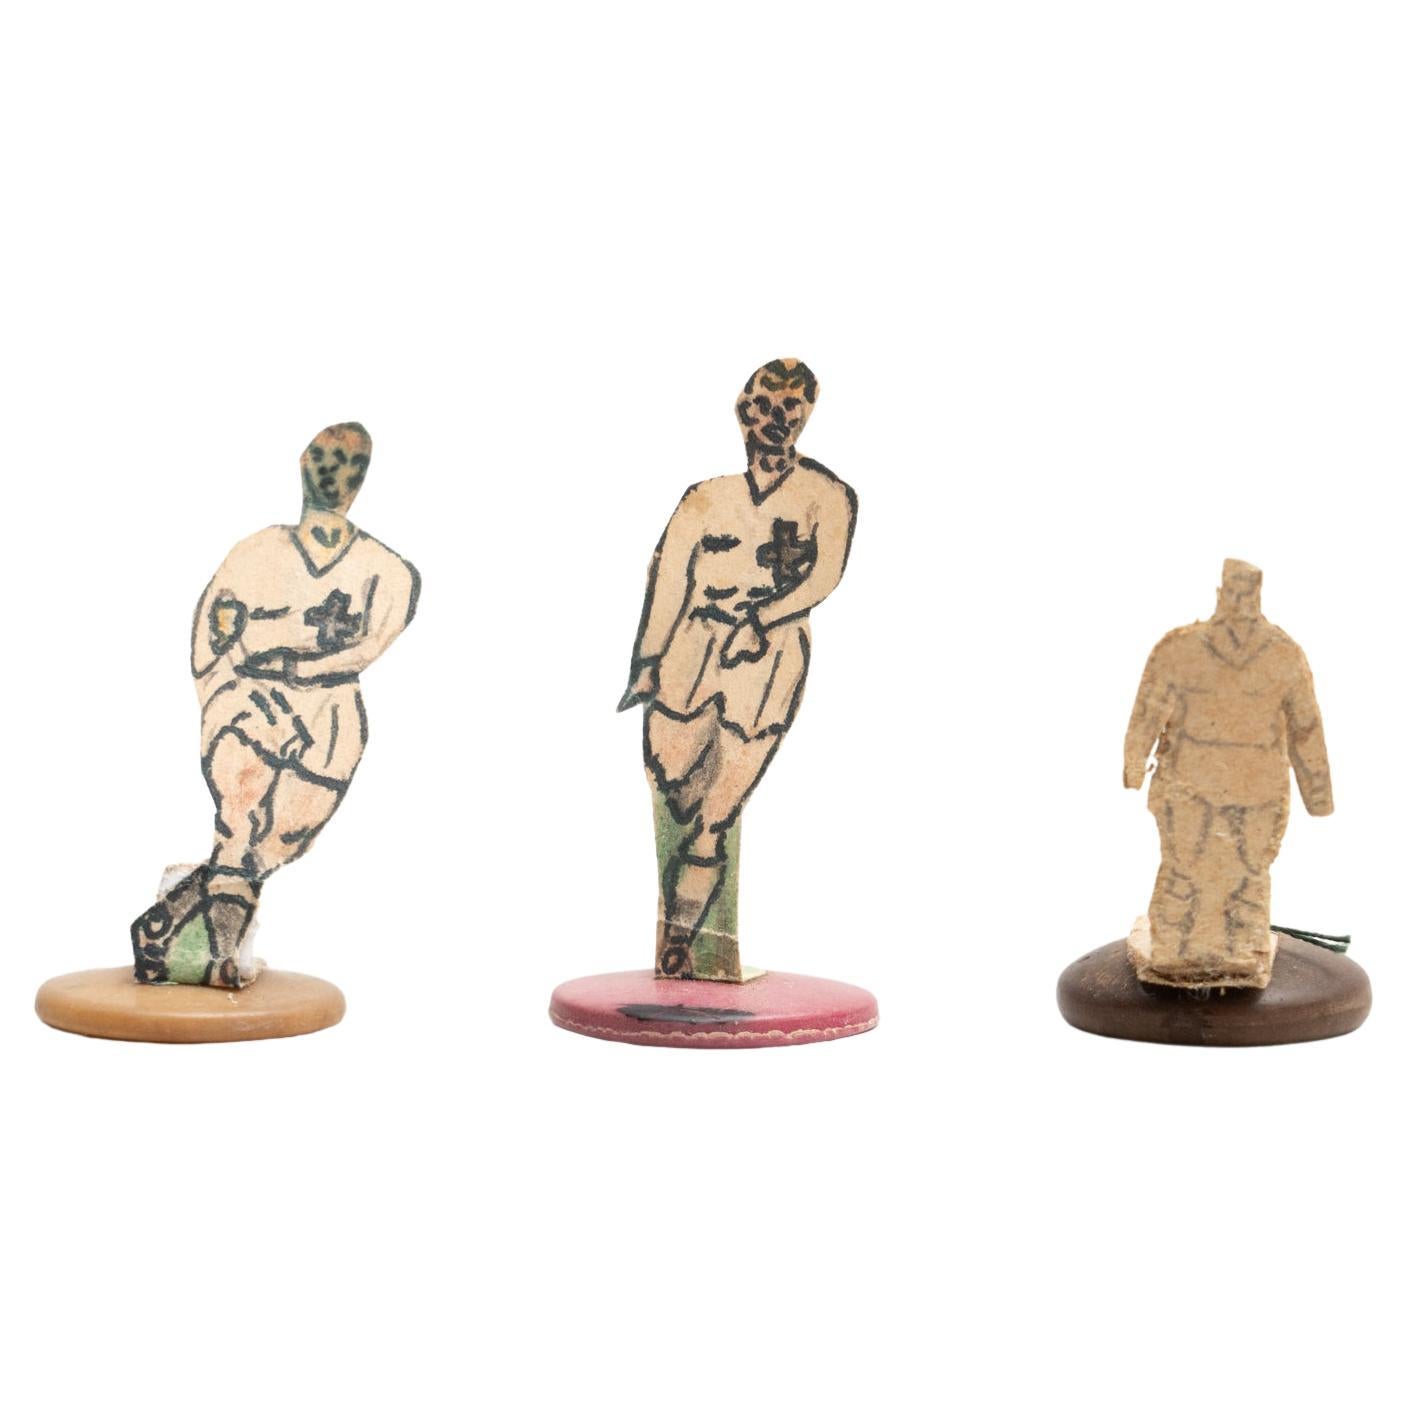 Set of 3 Traditional Antique Button Soccer Game Figures, circa 1950 For Sale